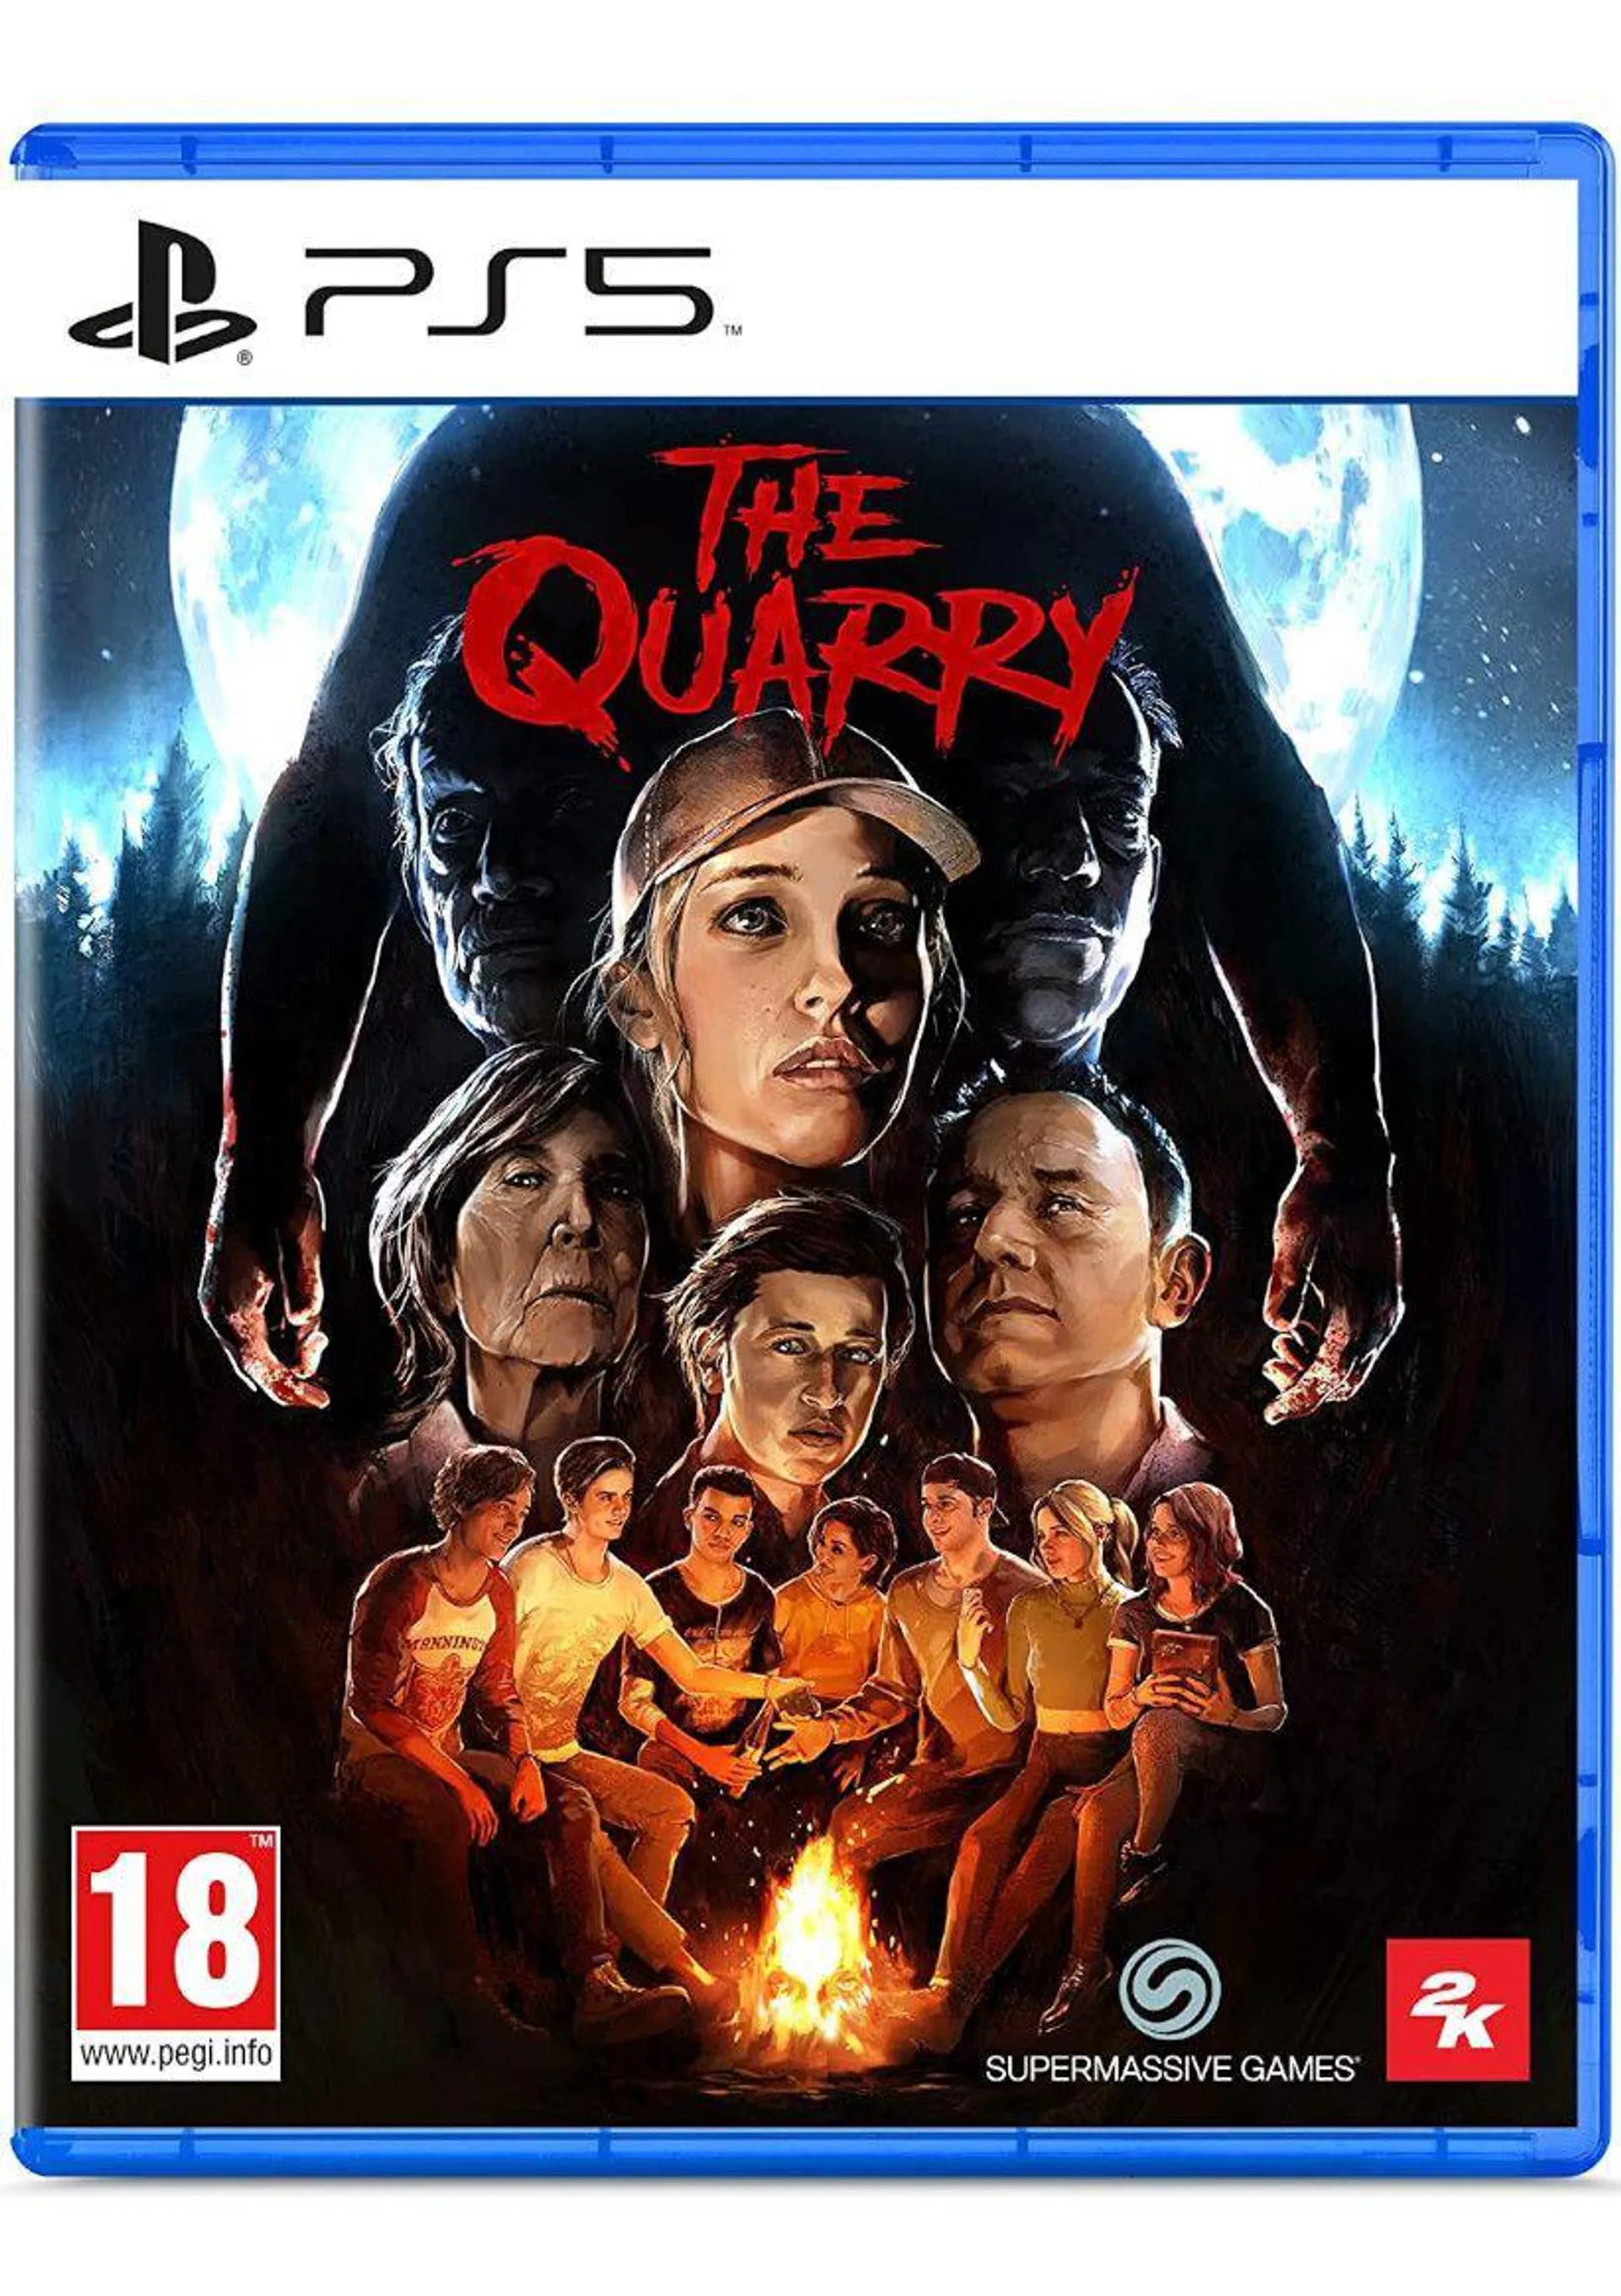 The Quarry on PlayStation 5